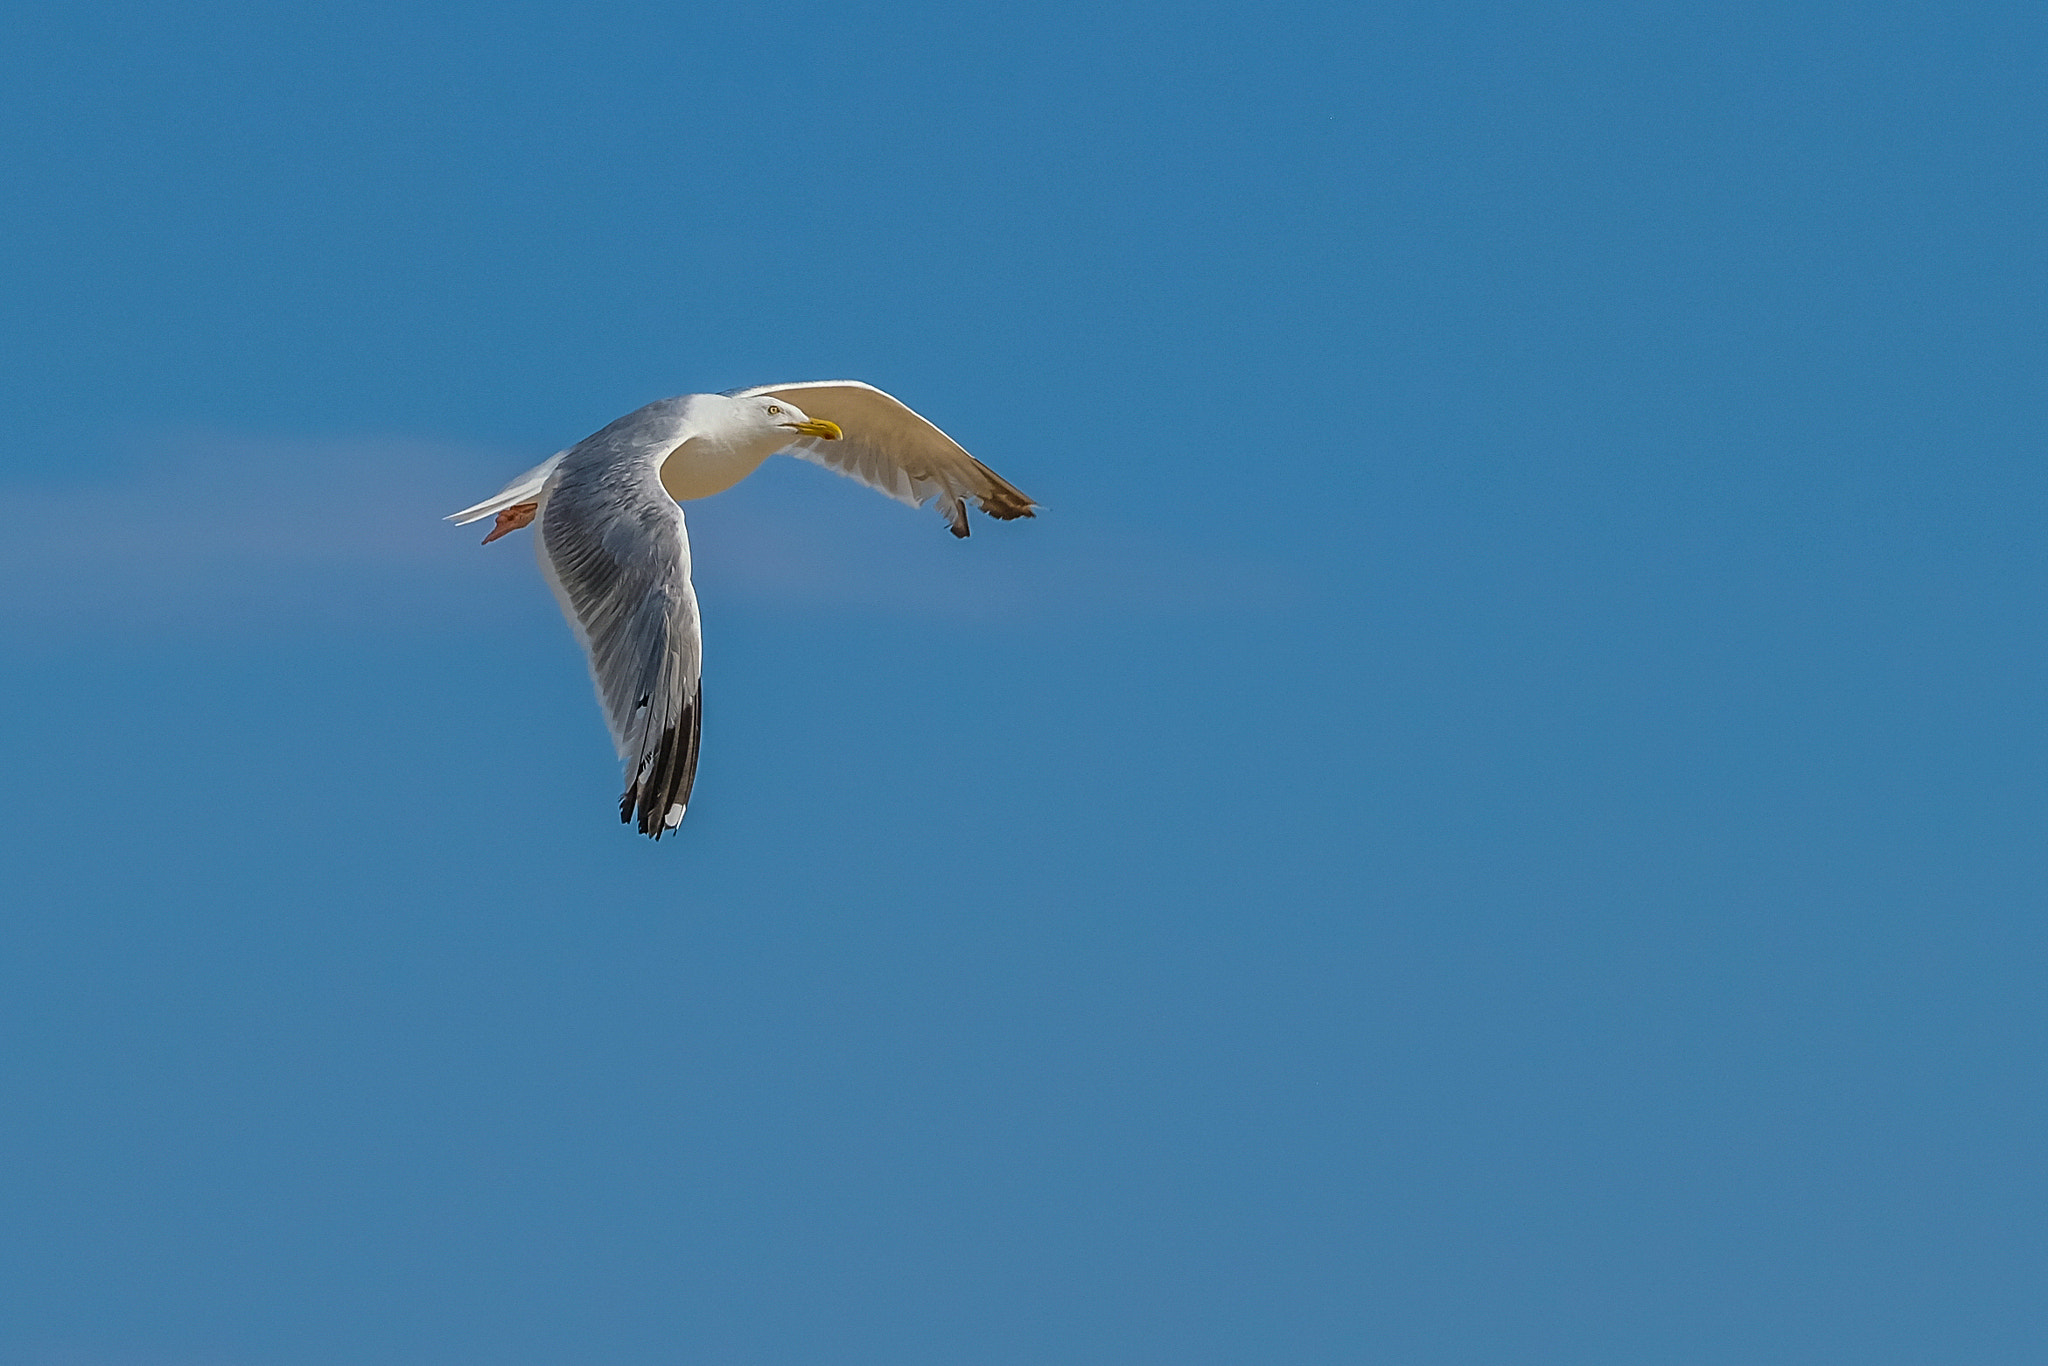 XF50-140mmF2.8 R LM OIS WR + 1.4x sample photo. Seagull solo flight photography